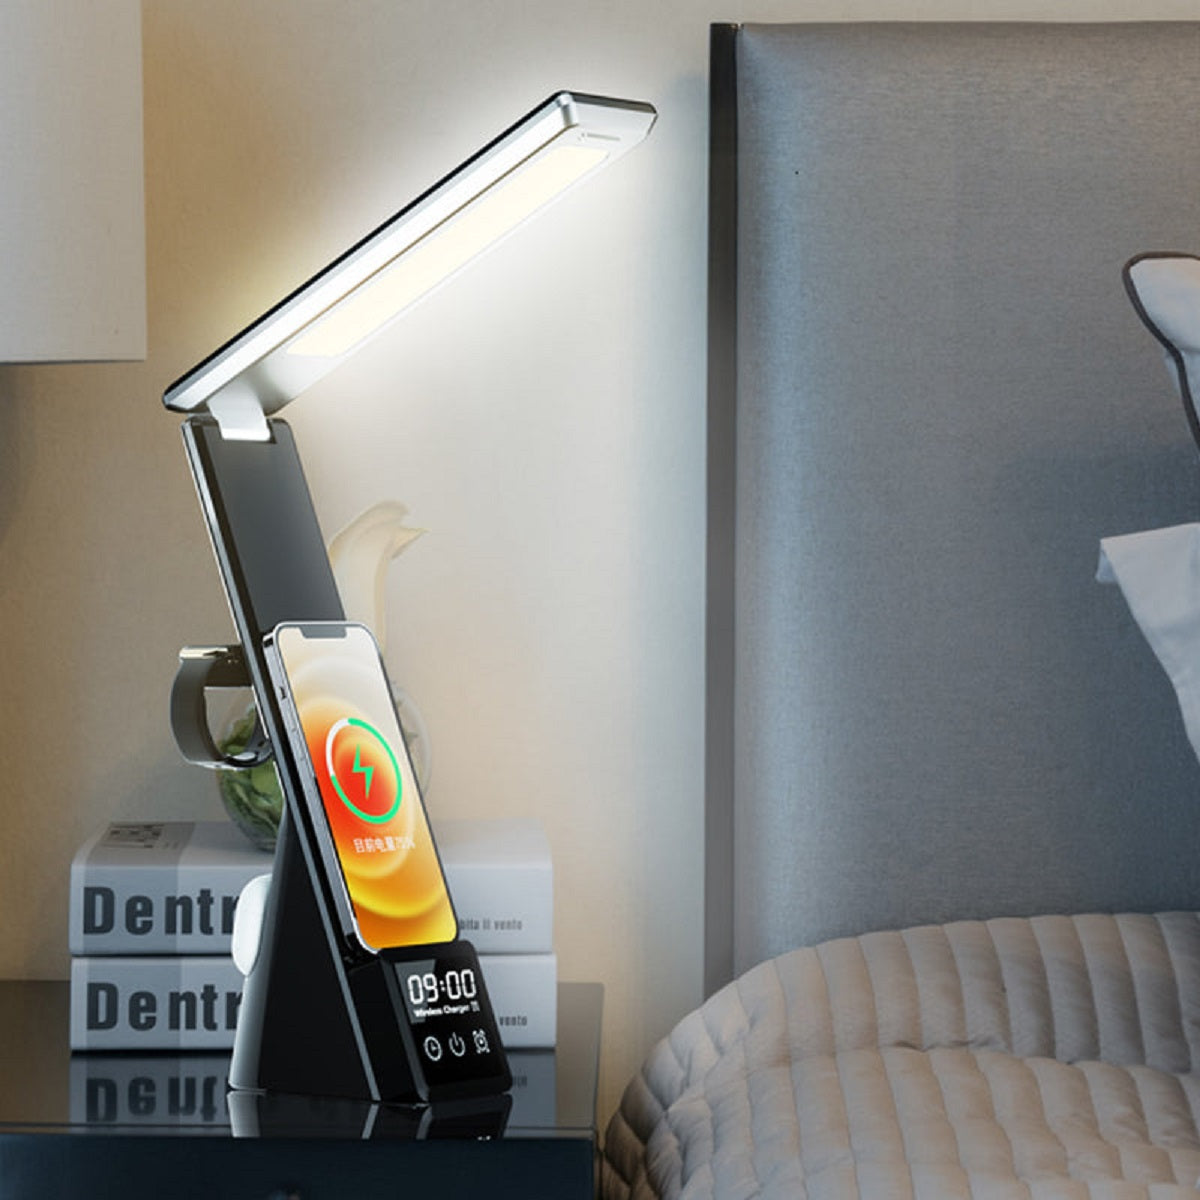 Introducing the Lumi-Mini: The Ultimate Multifunctional LED Desk Lamp with Wireless Charger!